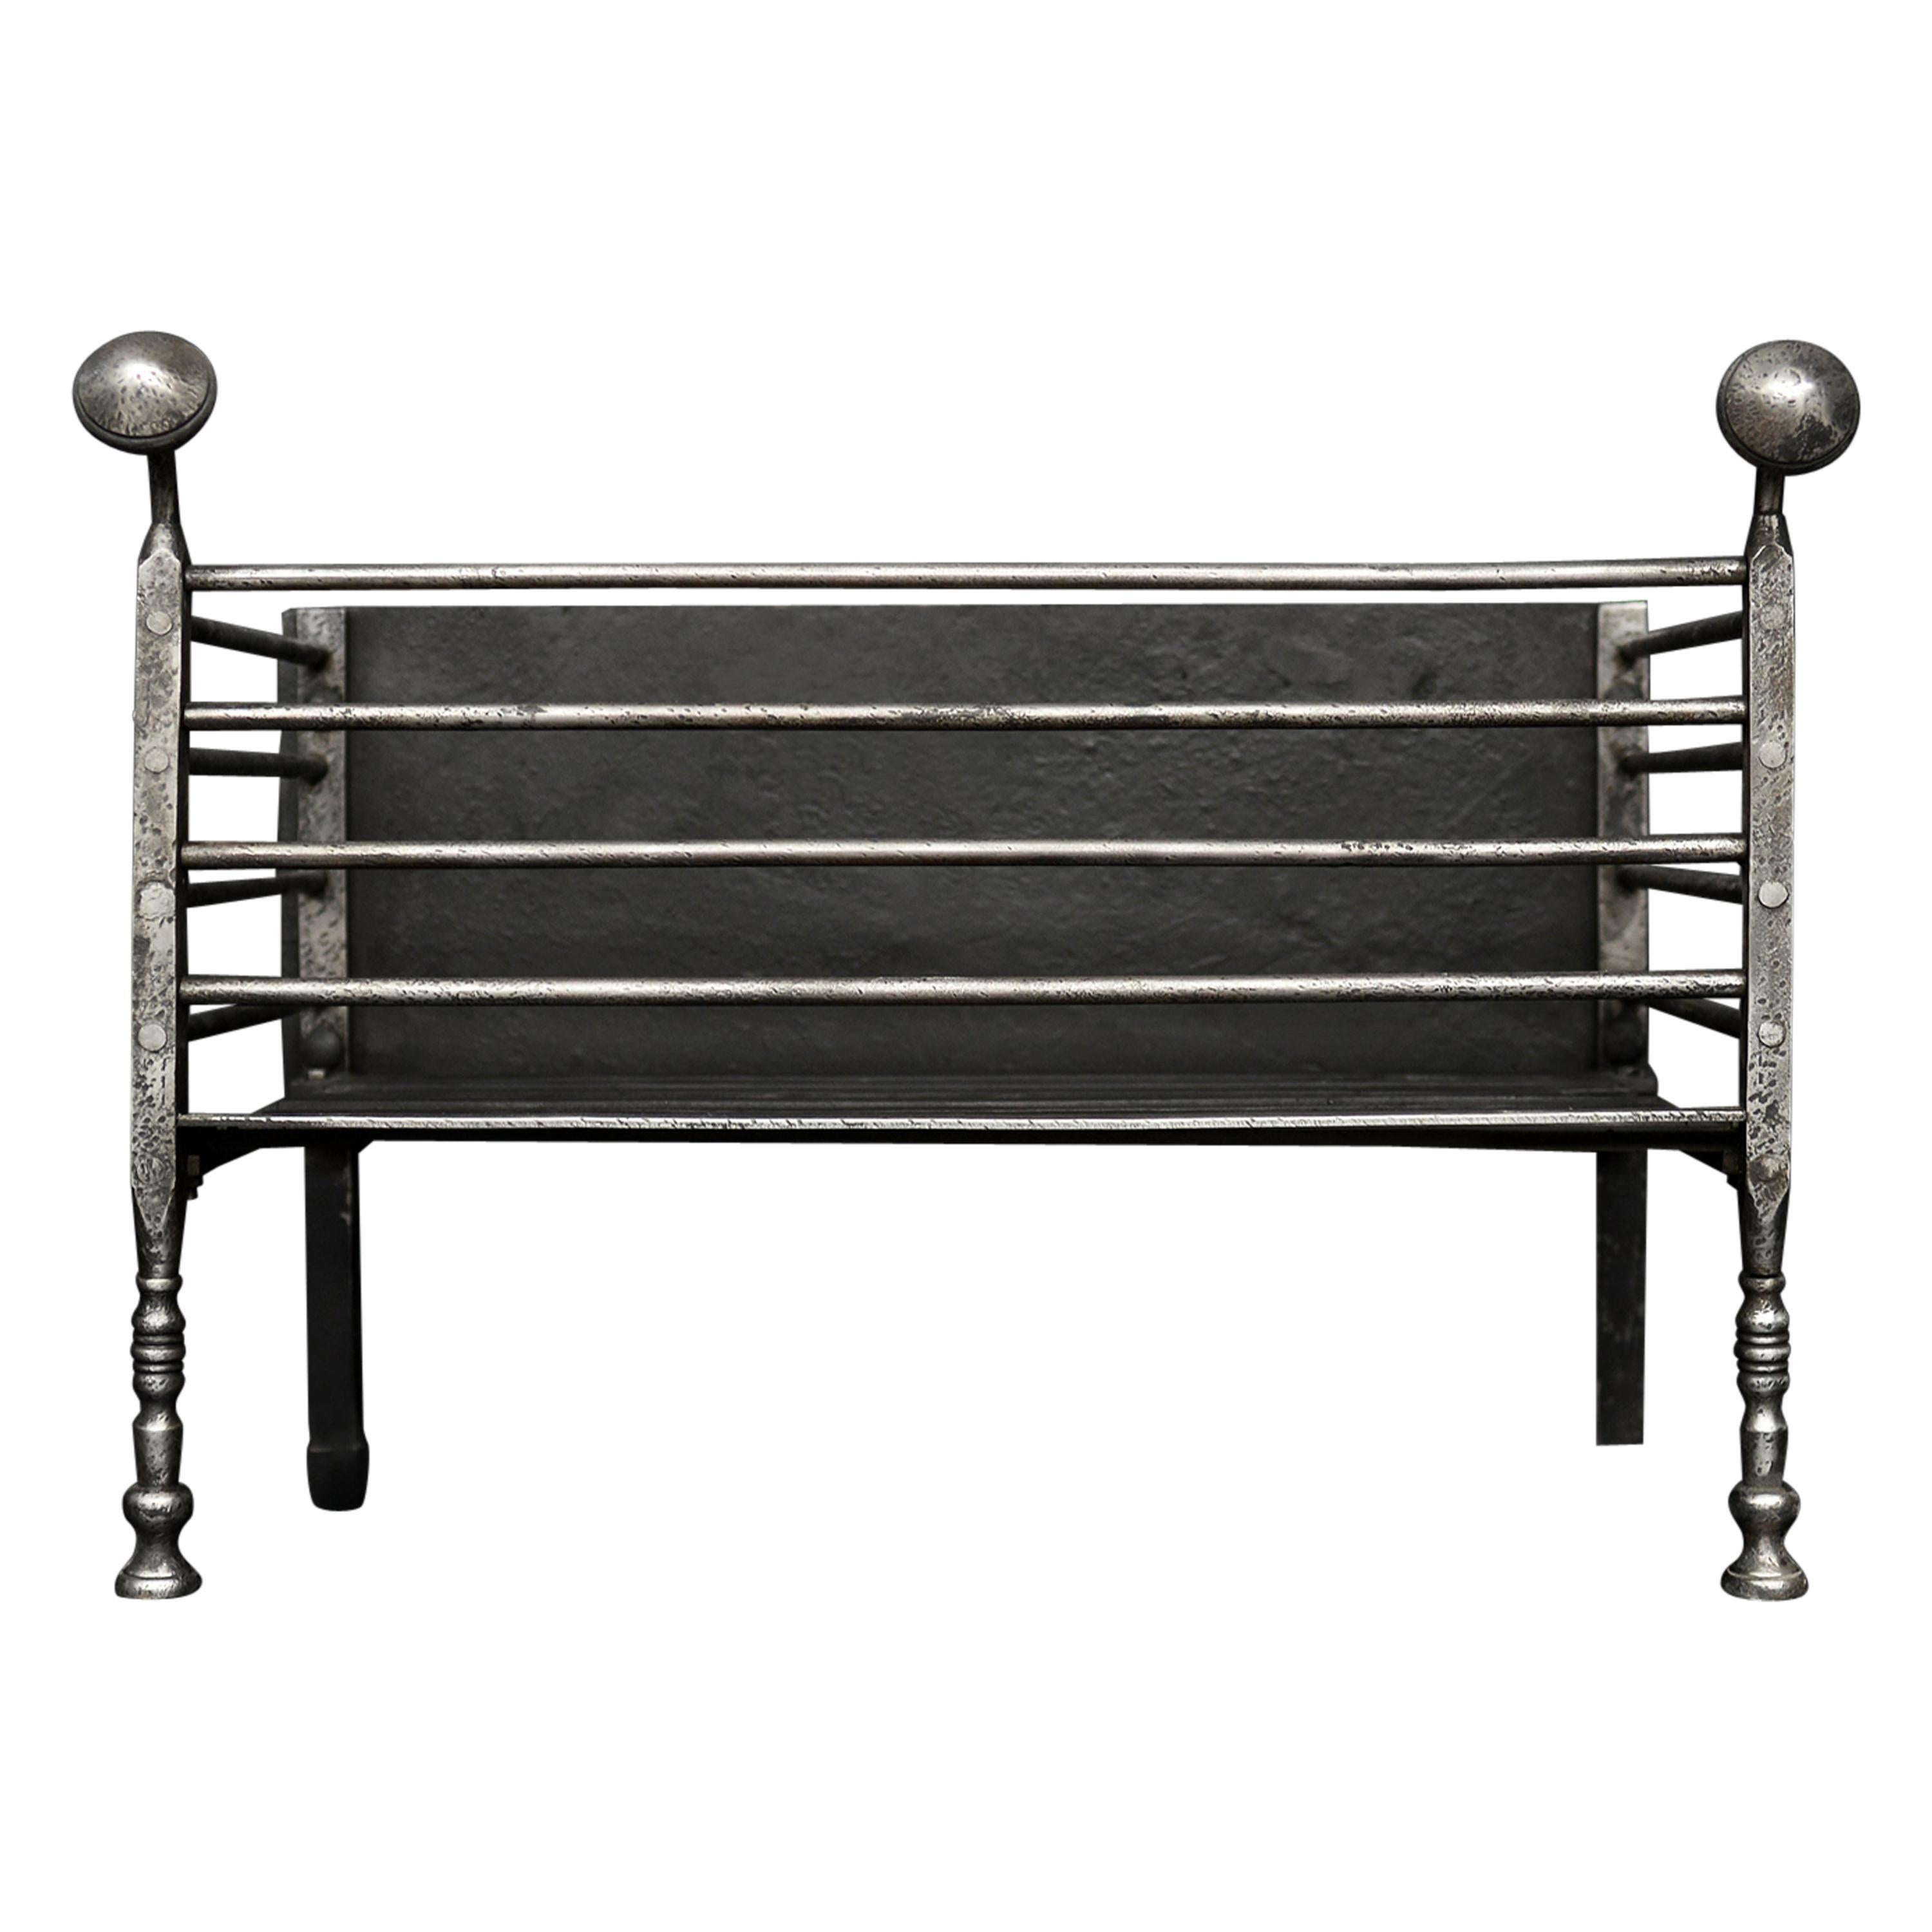 English Polished Wrought Iron Firebasket of Architectural Form For Sale